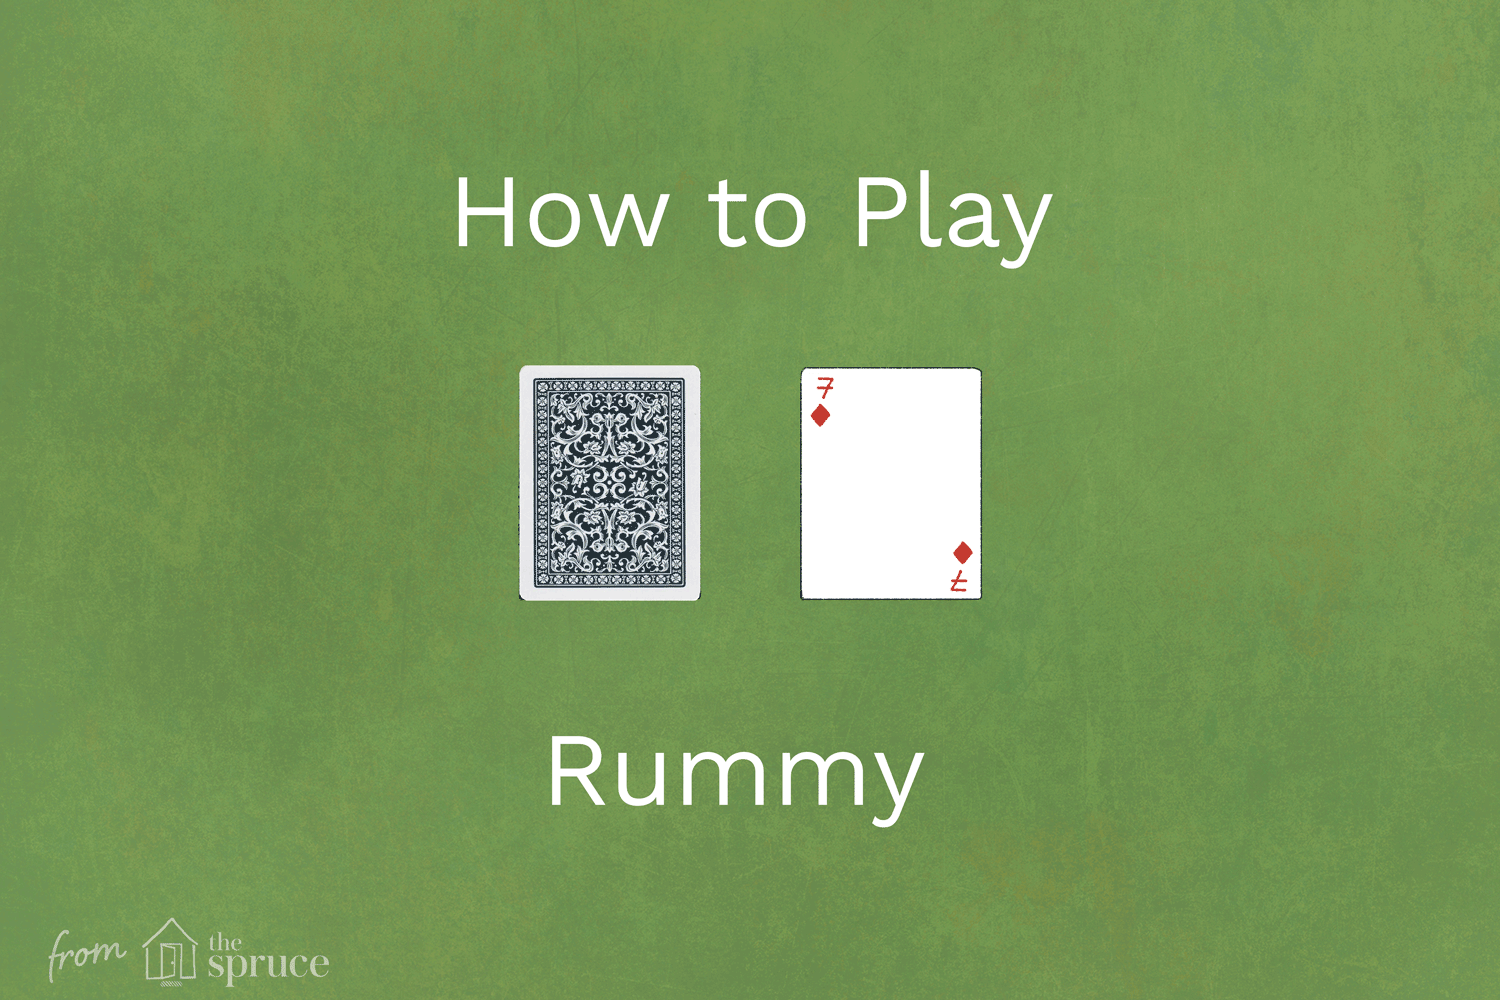 rules of gin rummy